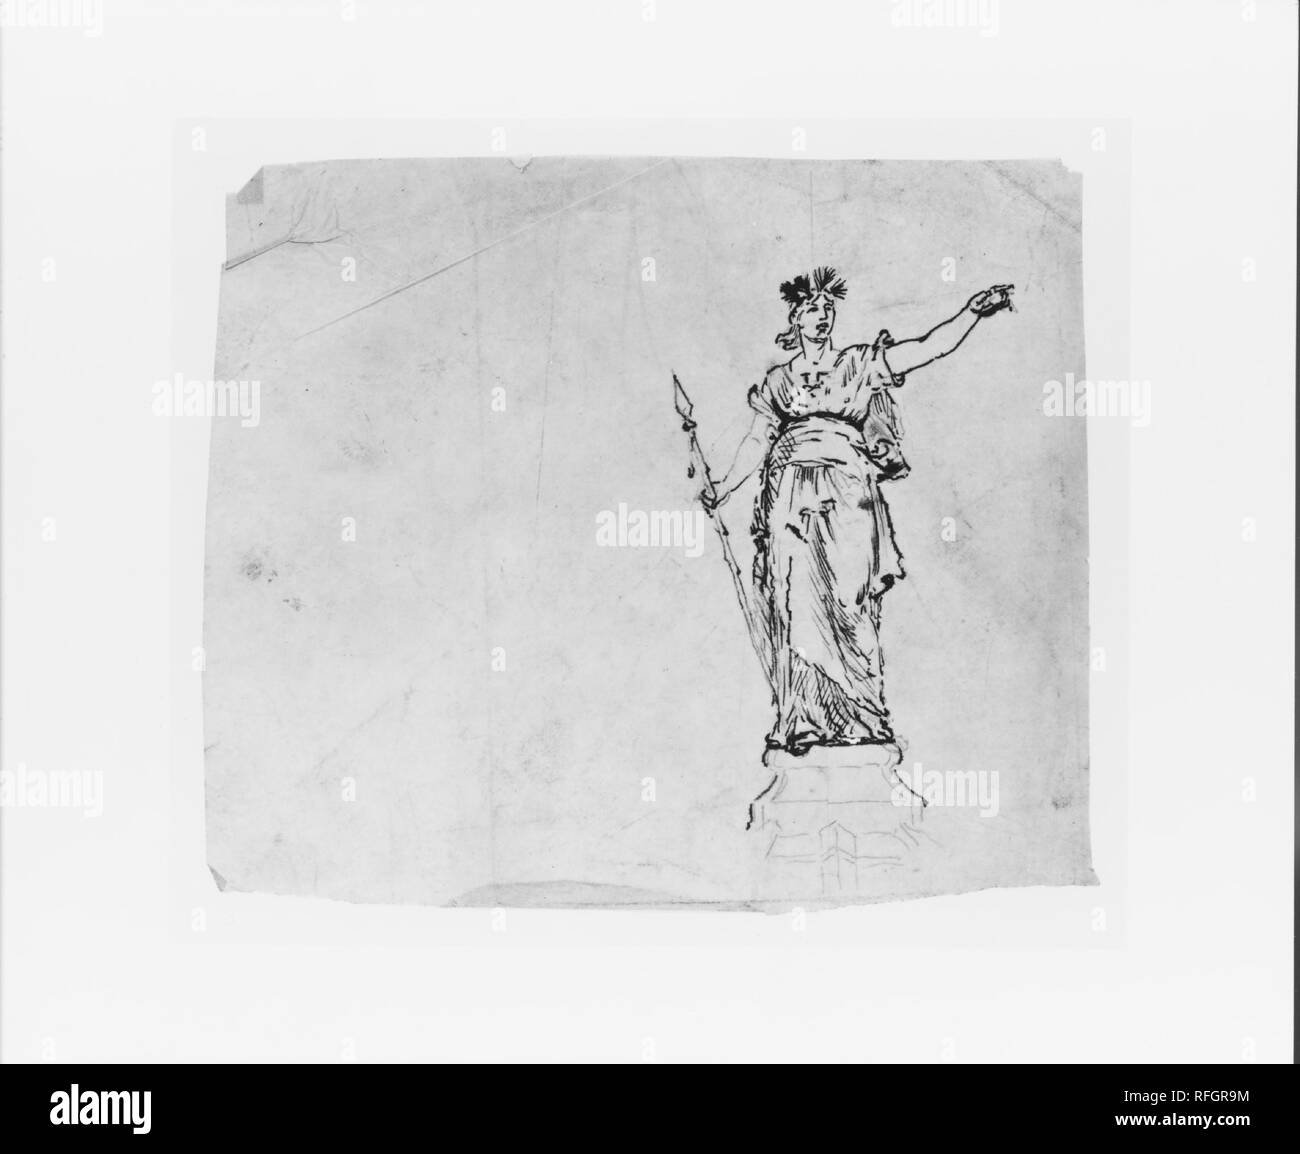 Study for Victory (from Sketchbook). Artist: John Quincy Adams Ward (American, Urbana, Ohio 1830-1910 New York). Dimensions: 5 5/8 × 6 7/8 in. (14.3 × 17.5 cm). Date: ca. 1860.  Ward, a student of Henry Kirke Brown, became known as the 'Dean of American Sculpture.' This page is from a sketchbook, which provides an intimate look at the artist's working methods. Ward's sketches include several classically influenced figures mingled with American Indians on horseback as well as a number of bison. Museum: Metropolitan Museum of Art, New York, USA. Stock Photo